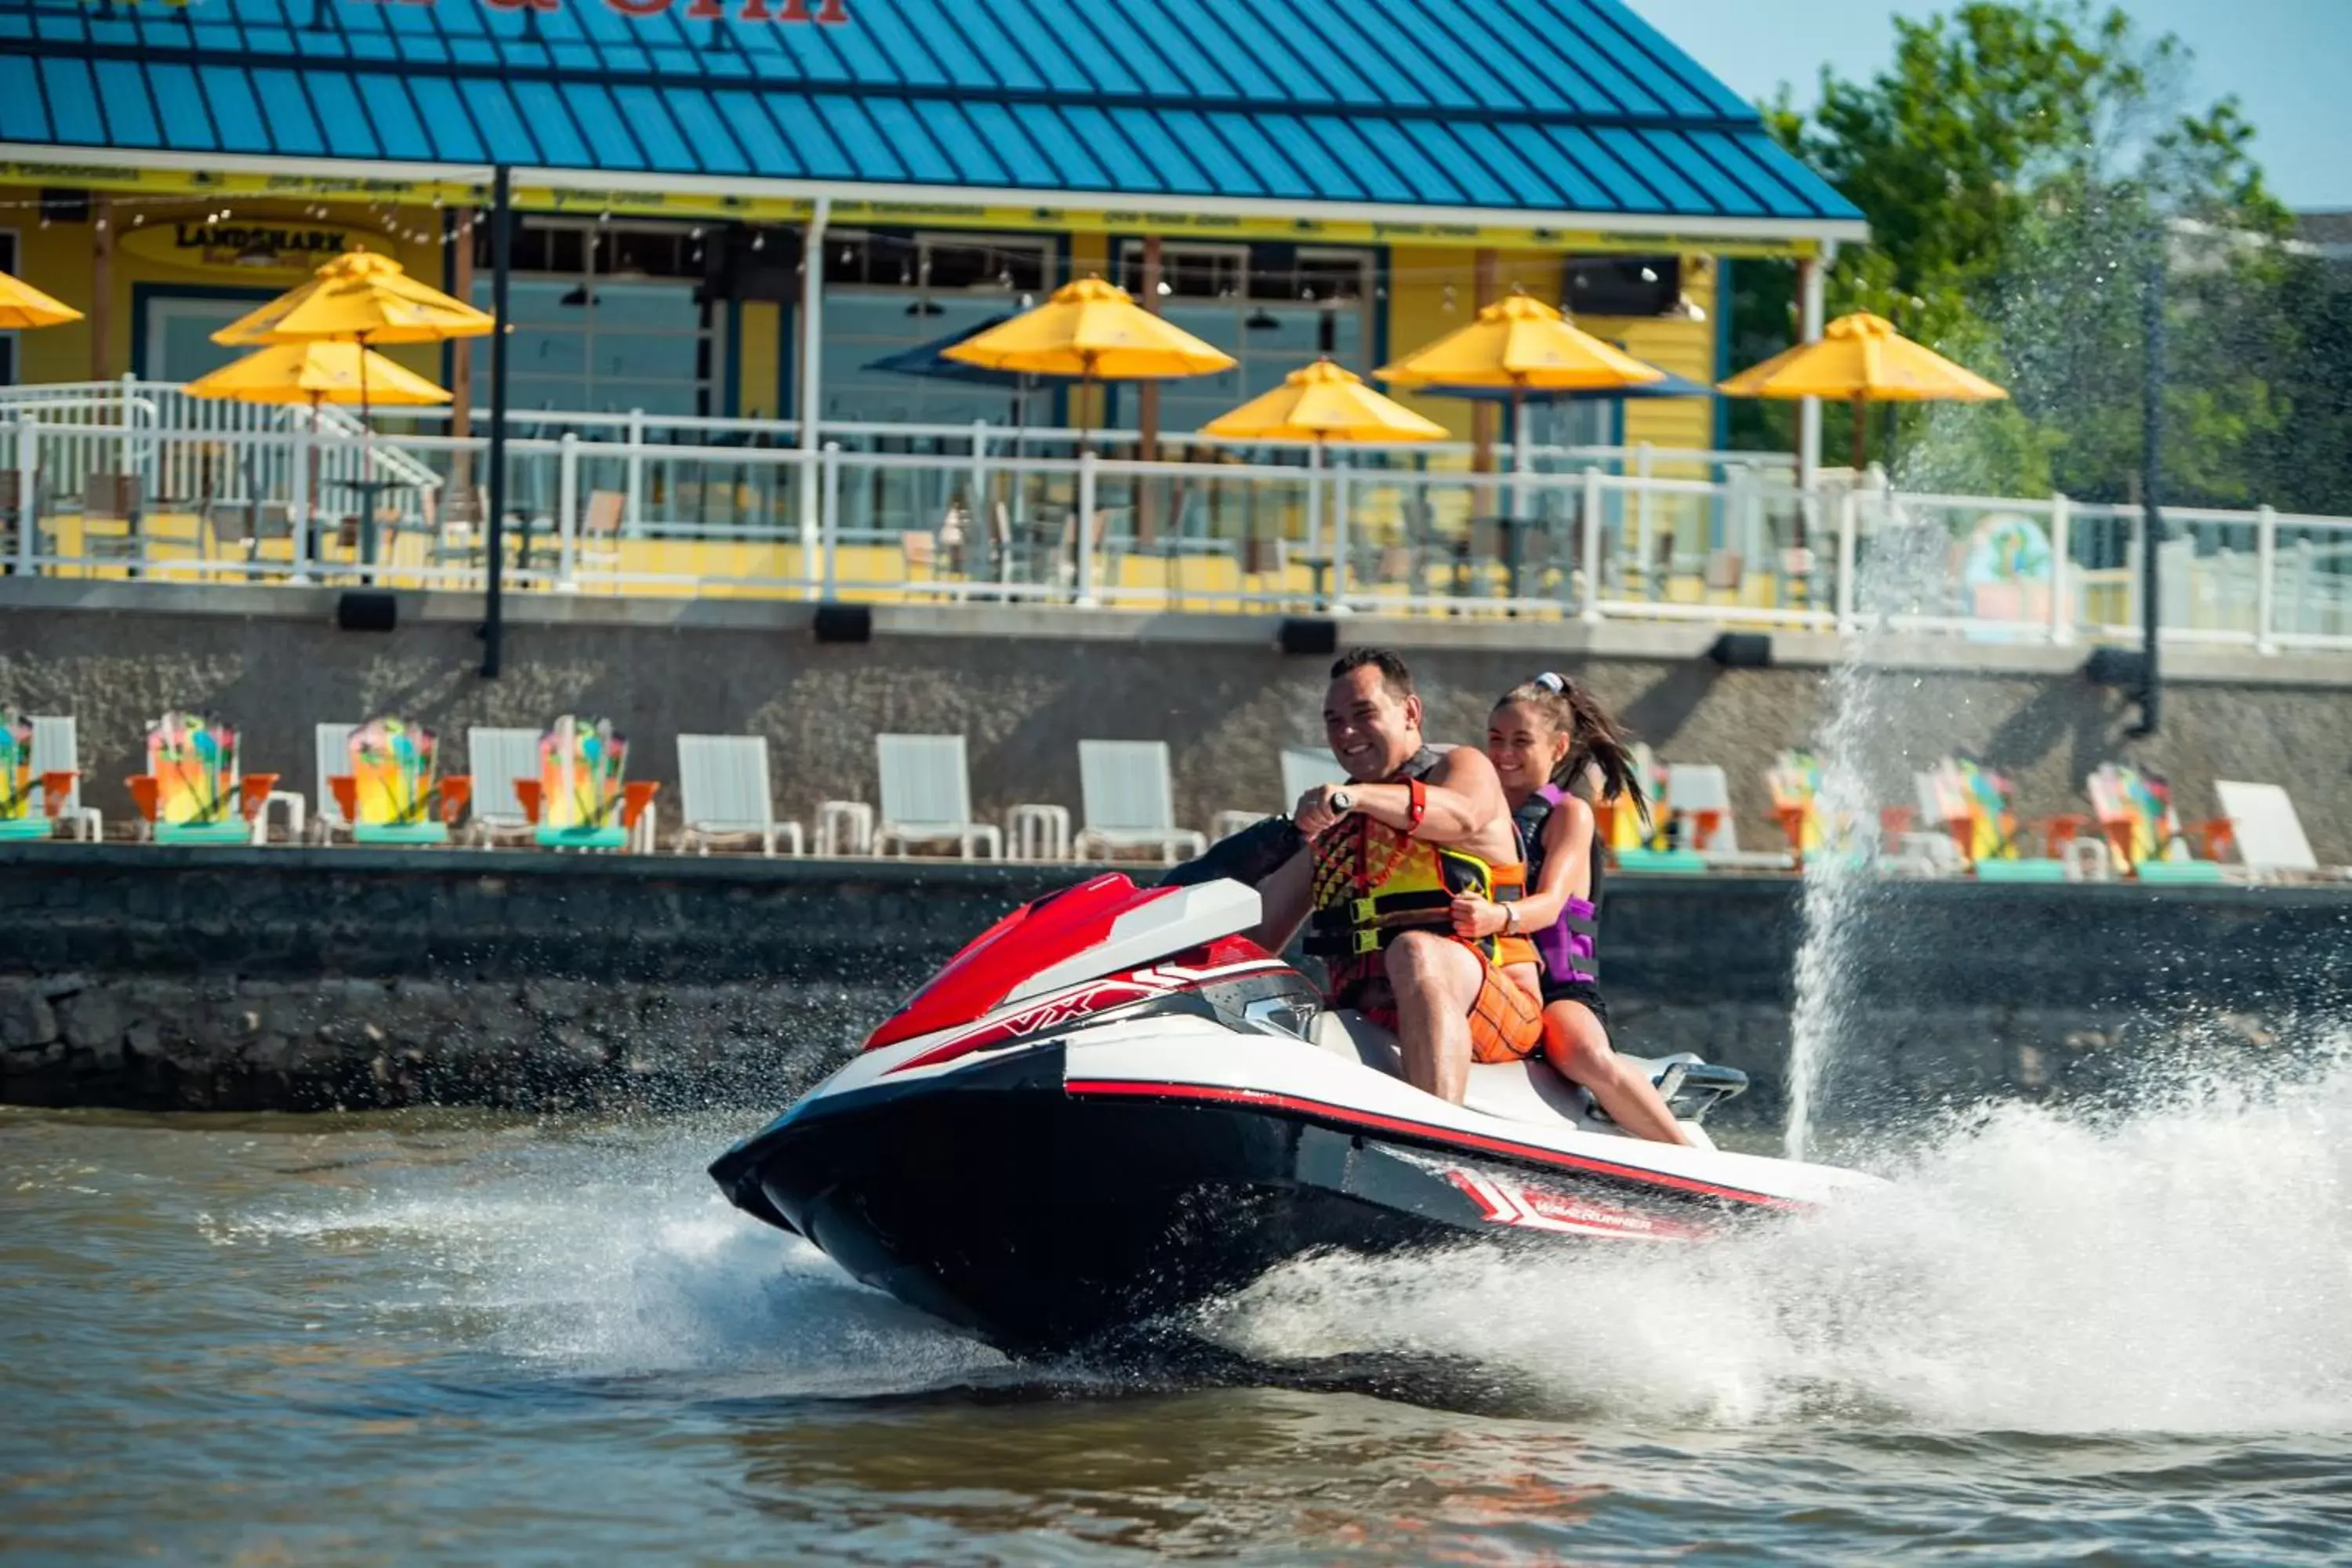 Activities, Other Activities in Margaritaville Lake Resort Lake of the Ozarks